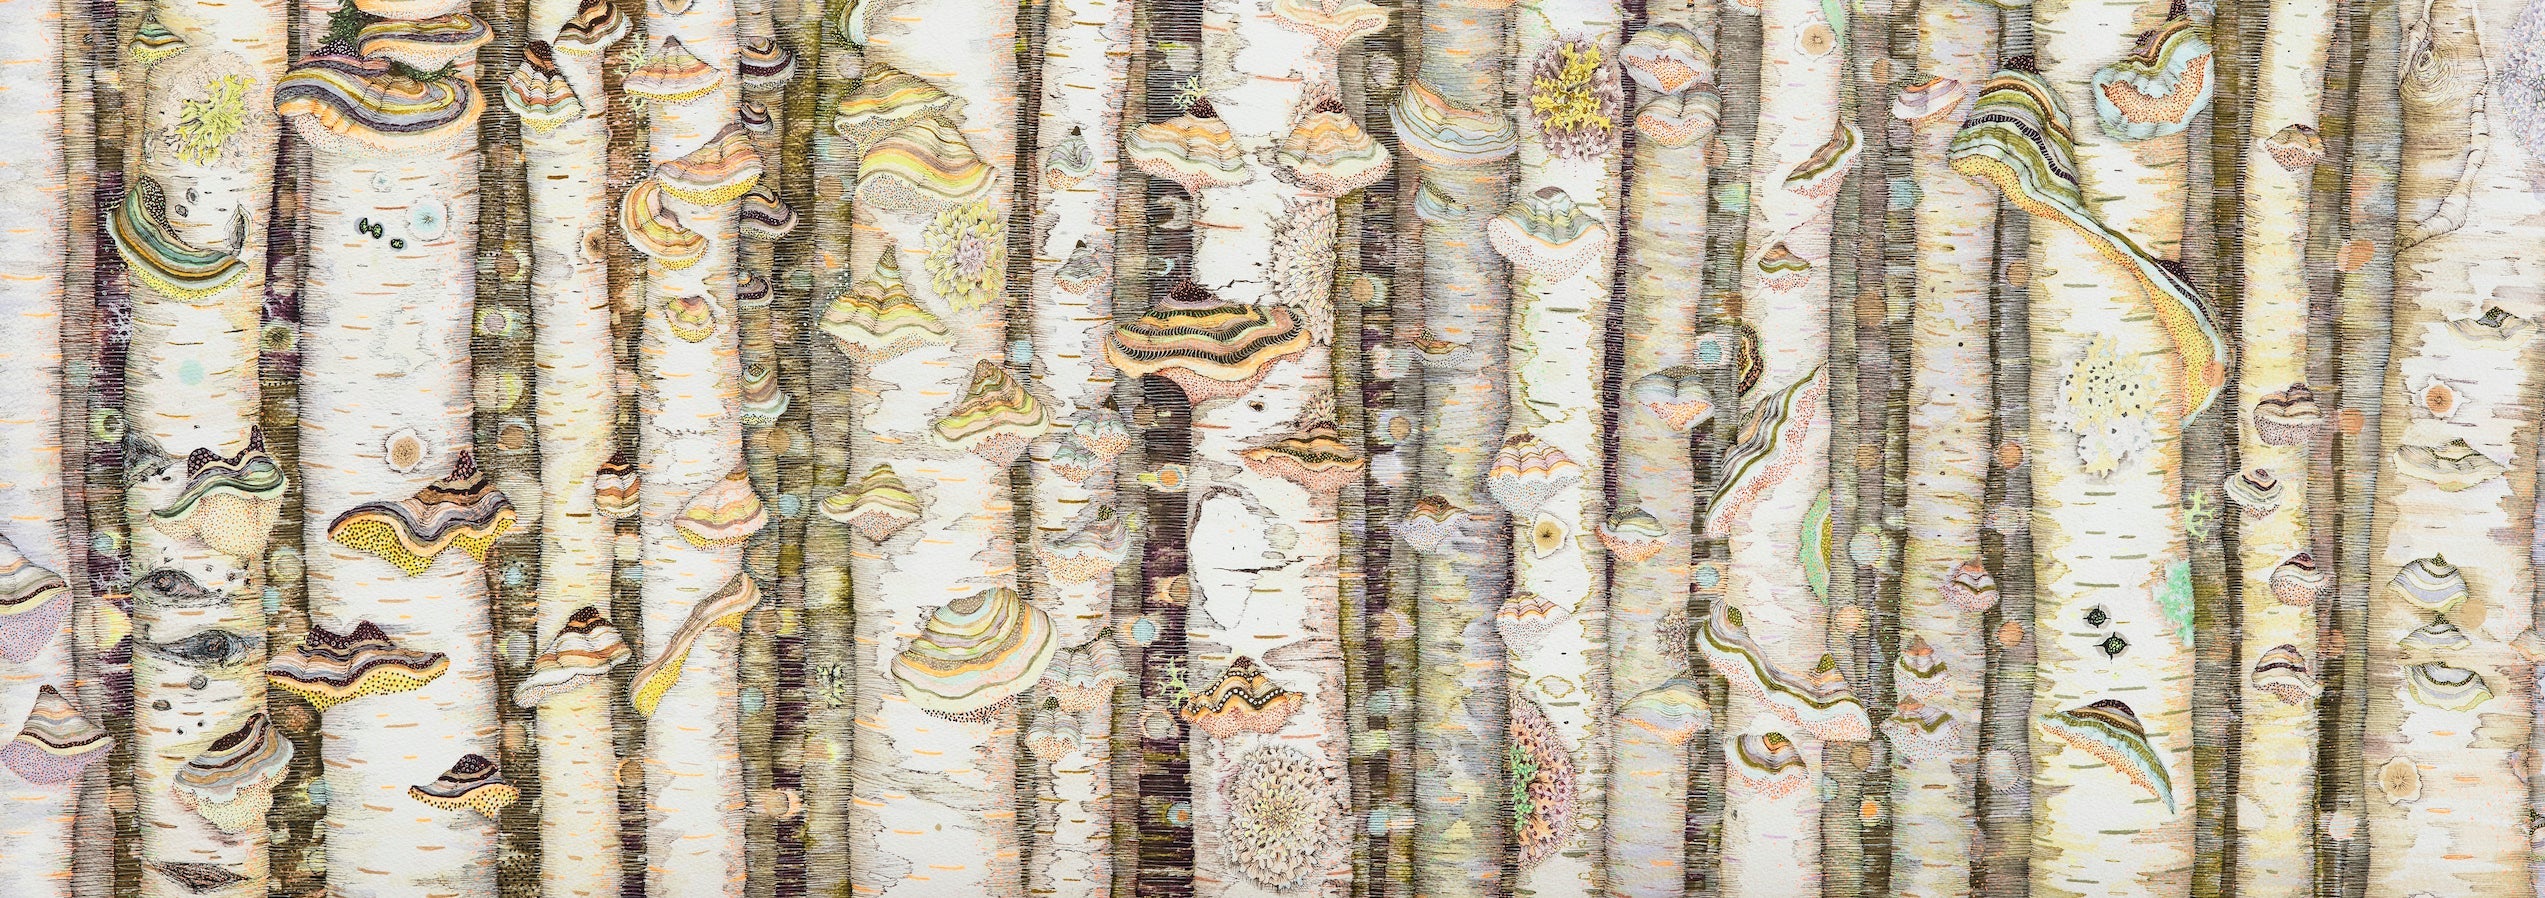 birch trees and polypore mushrooms